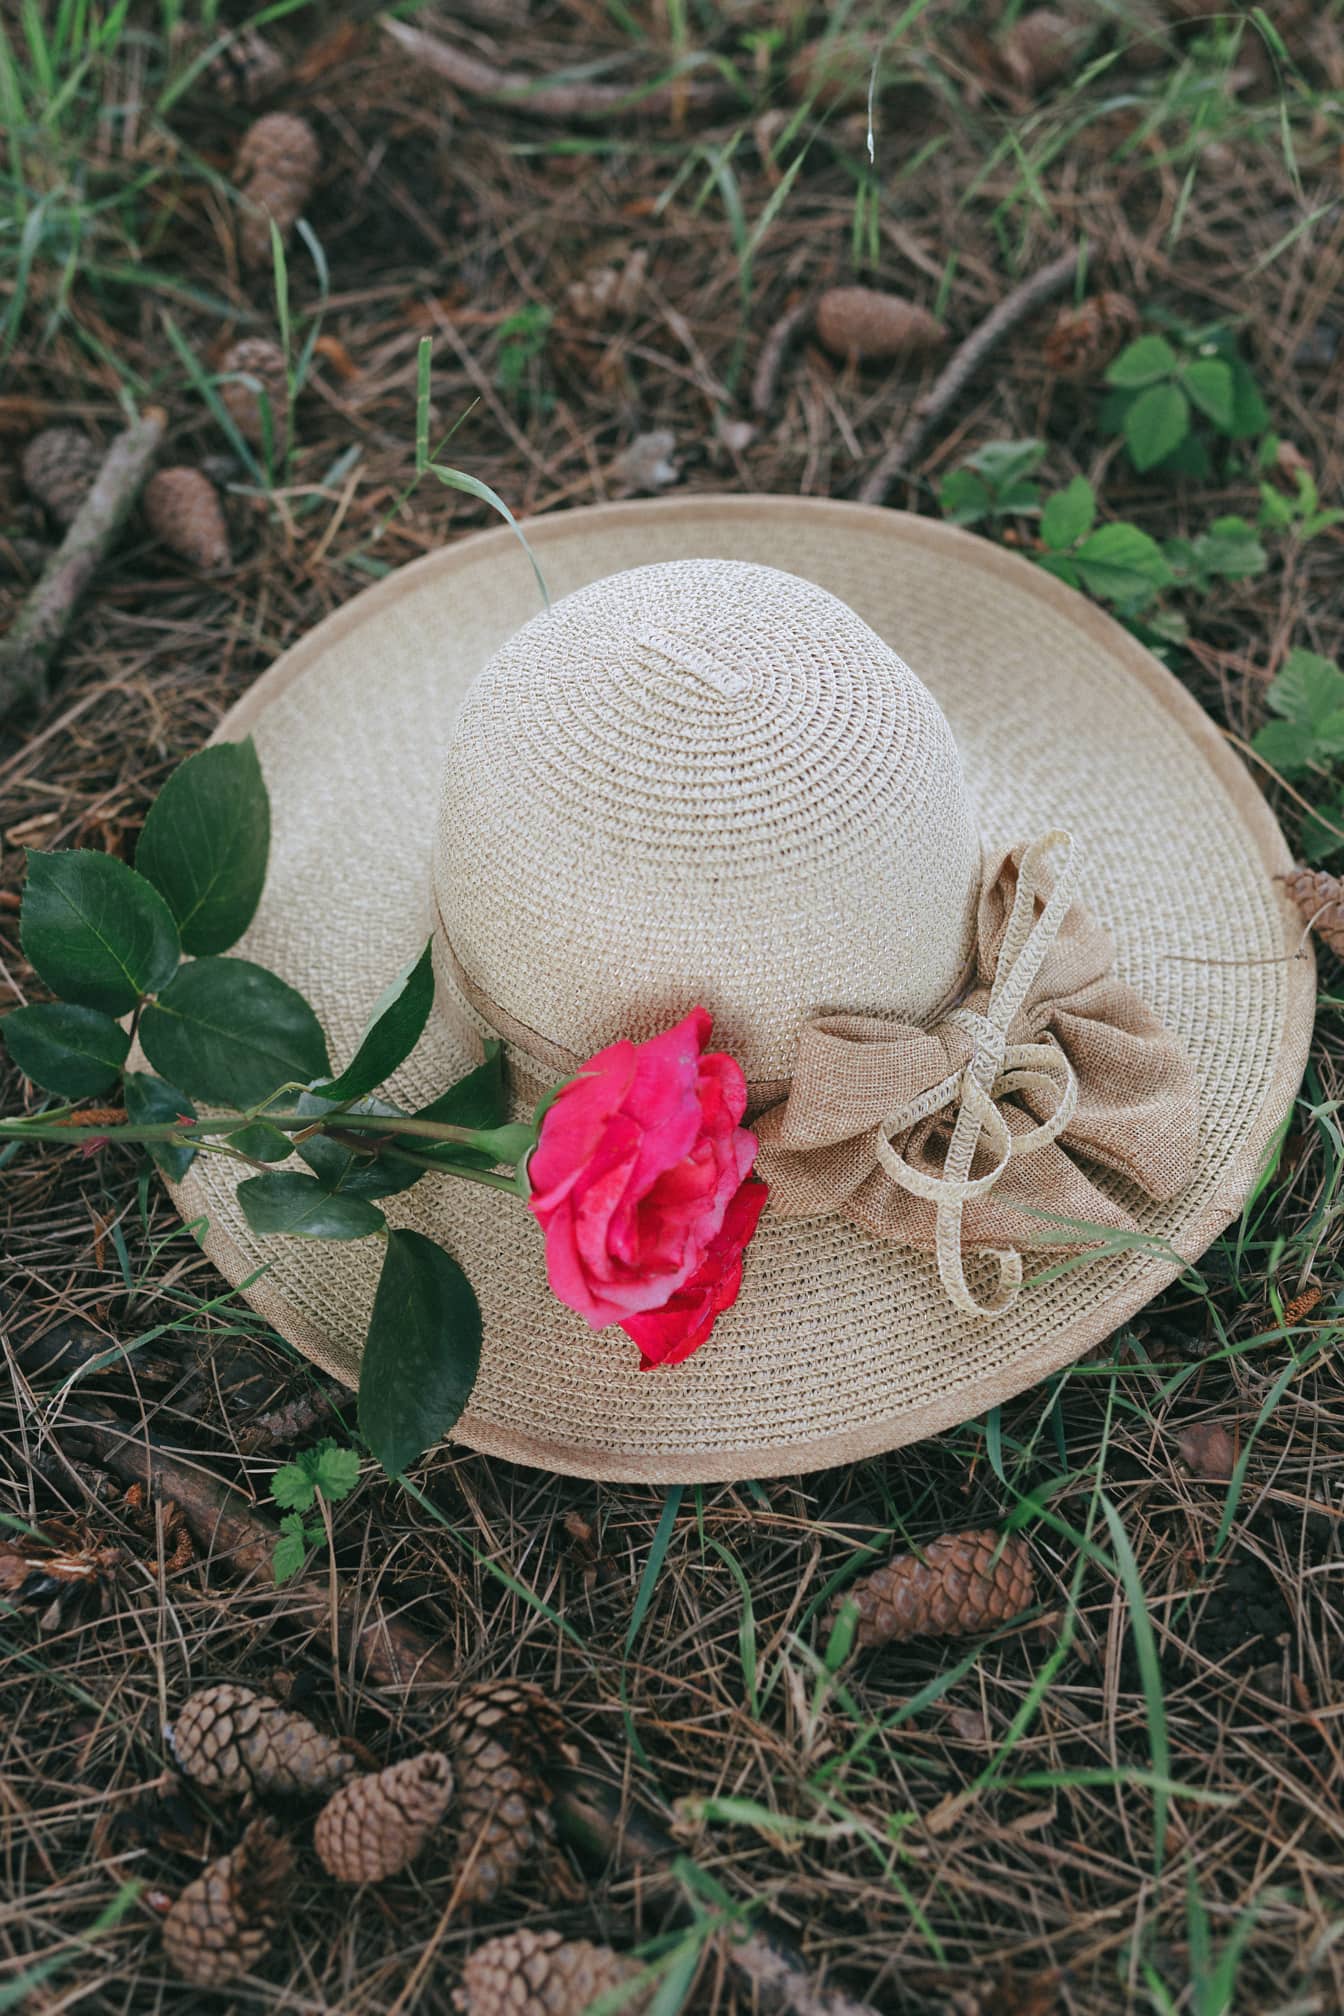 Handmade straw hat on ground with a pink rose on it